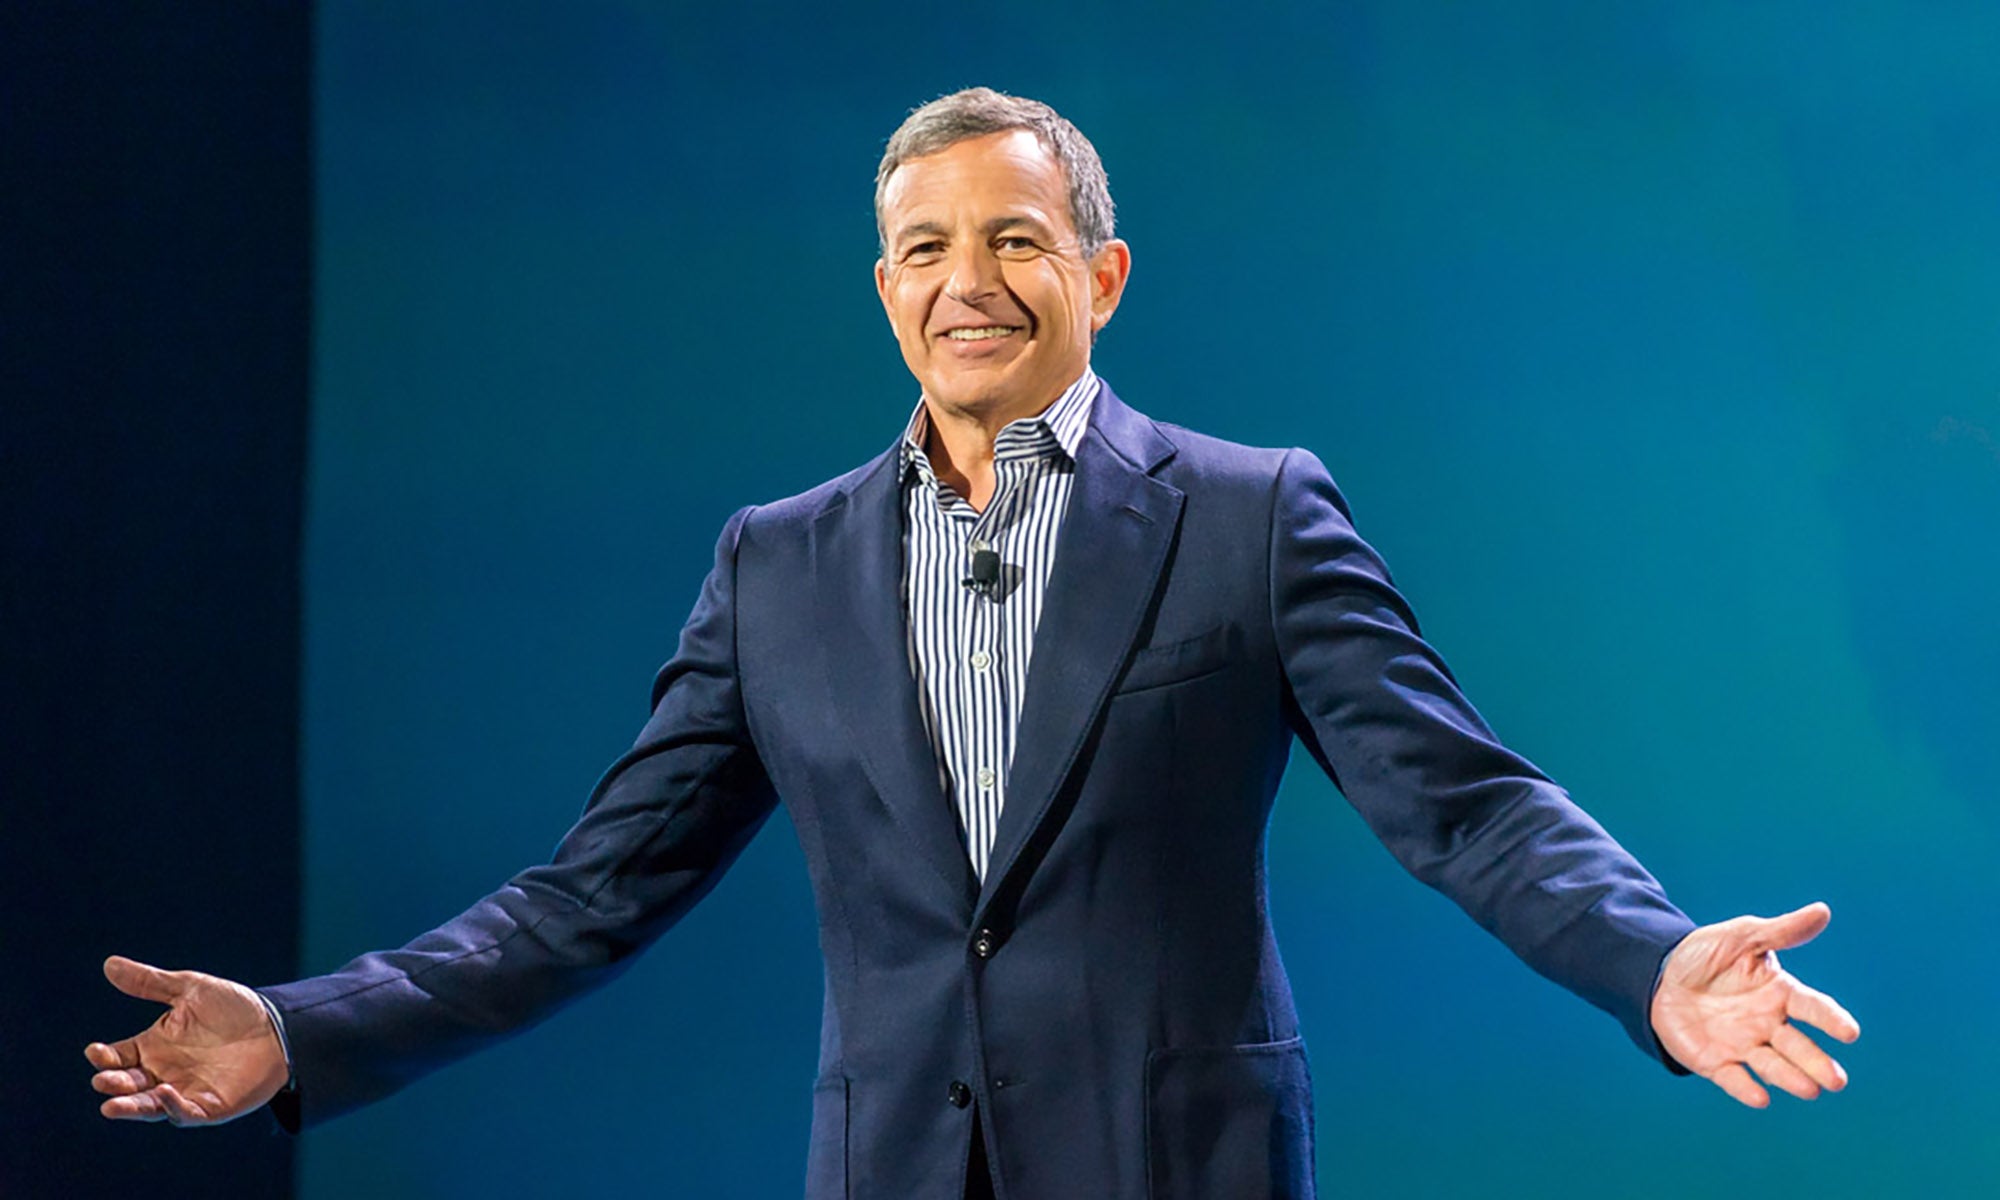 Image for Disney calls Bob Iger out of retirement as new CEO following stock drops, layoffs, more